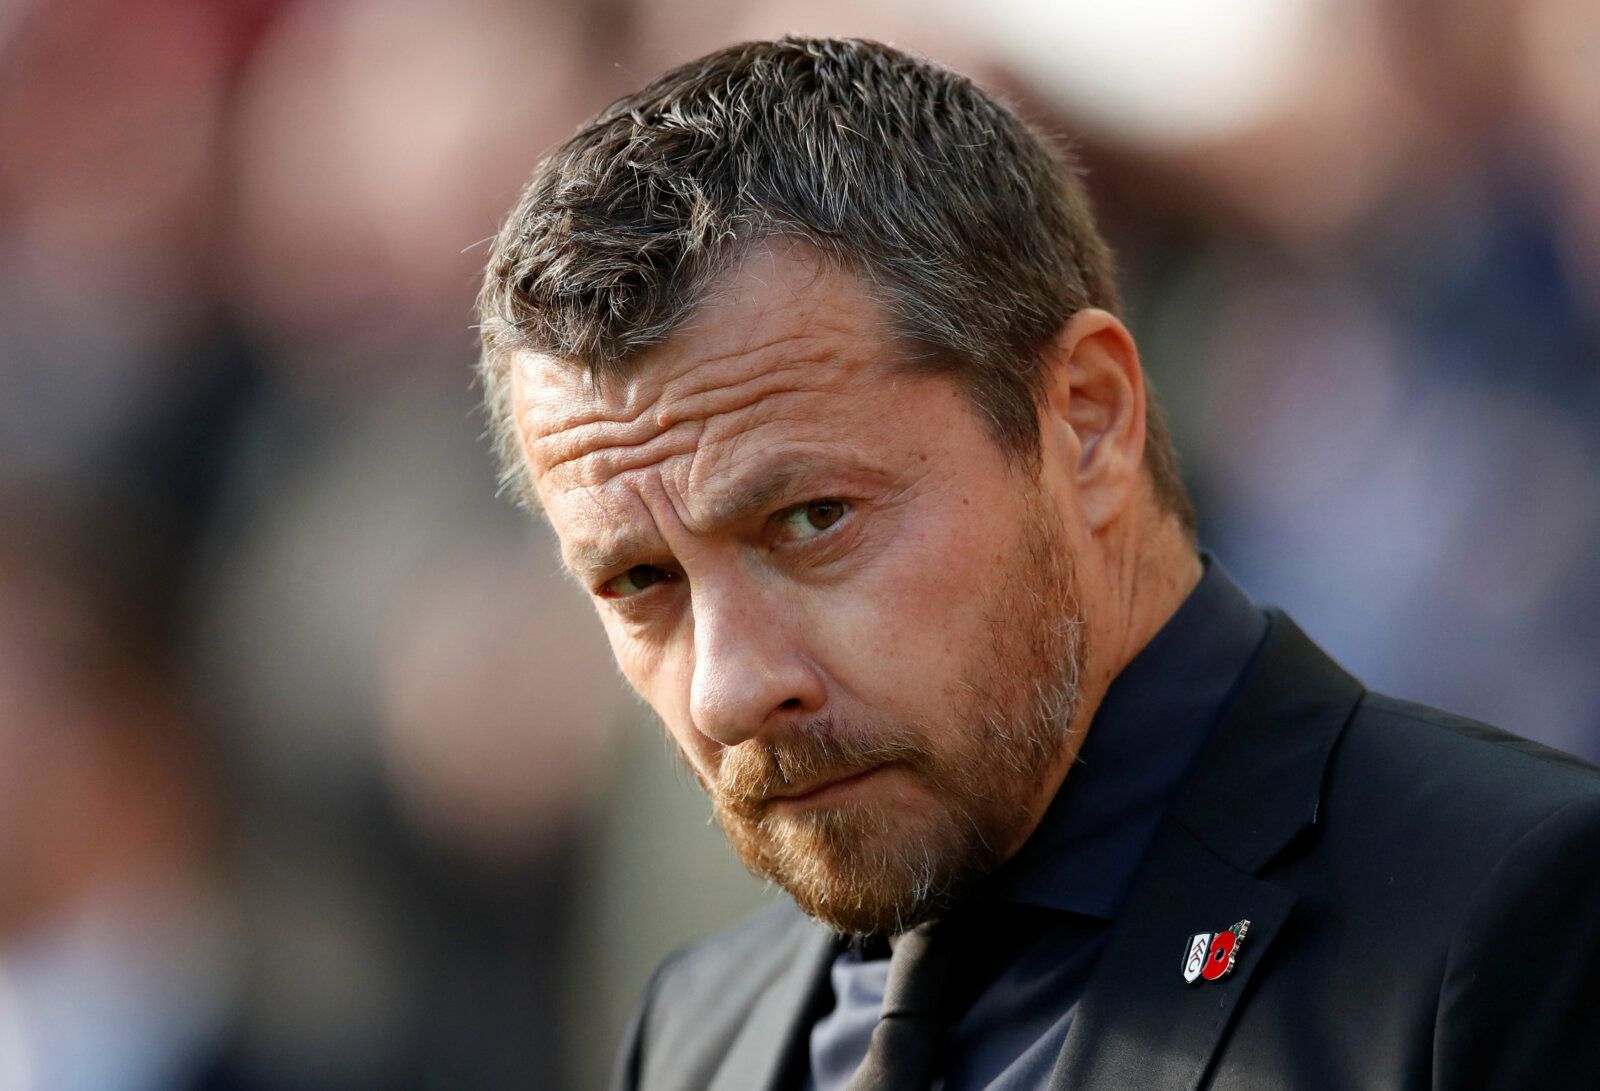 Soccer Football - Premier League - Liverpool v Fulham - Anfield, Liverpool, Britain - November 11, 2018  Fulham manager Slavisa Jokanovic           Action Images via Reuters/Andrew Boyers  EDITORIAL USE ONLY. No use with unauthorized audio, video, data, fixture lists, club/league logos or 